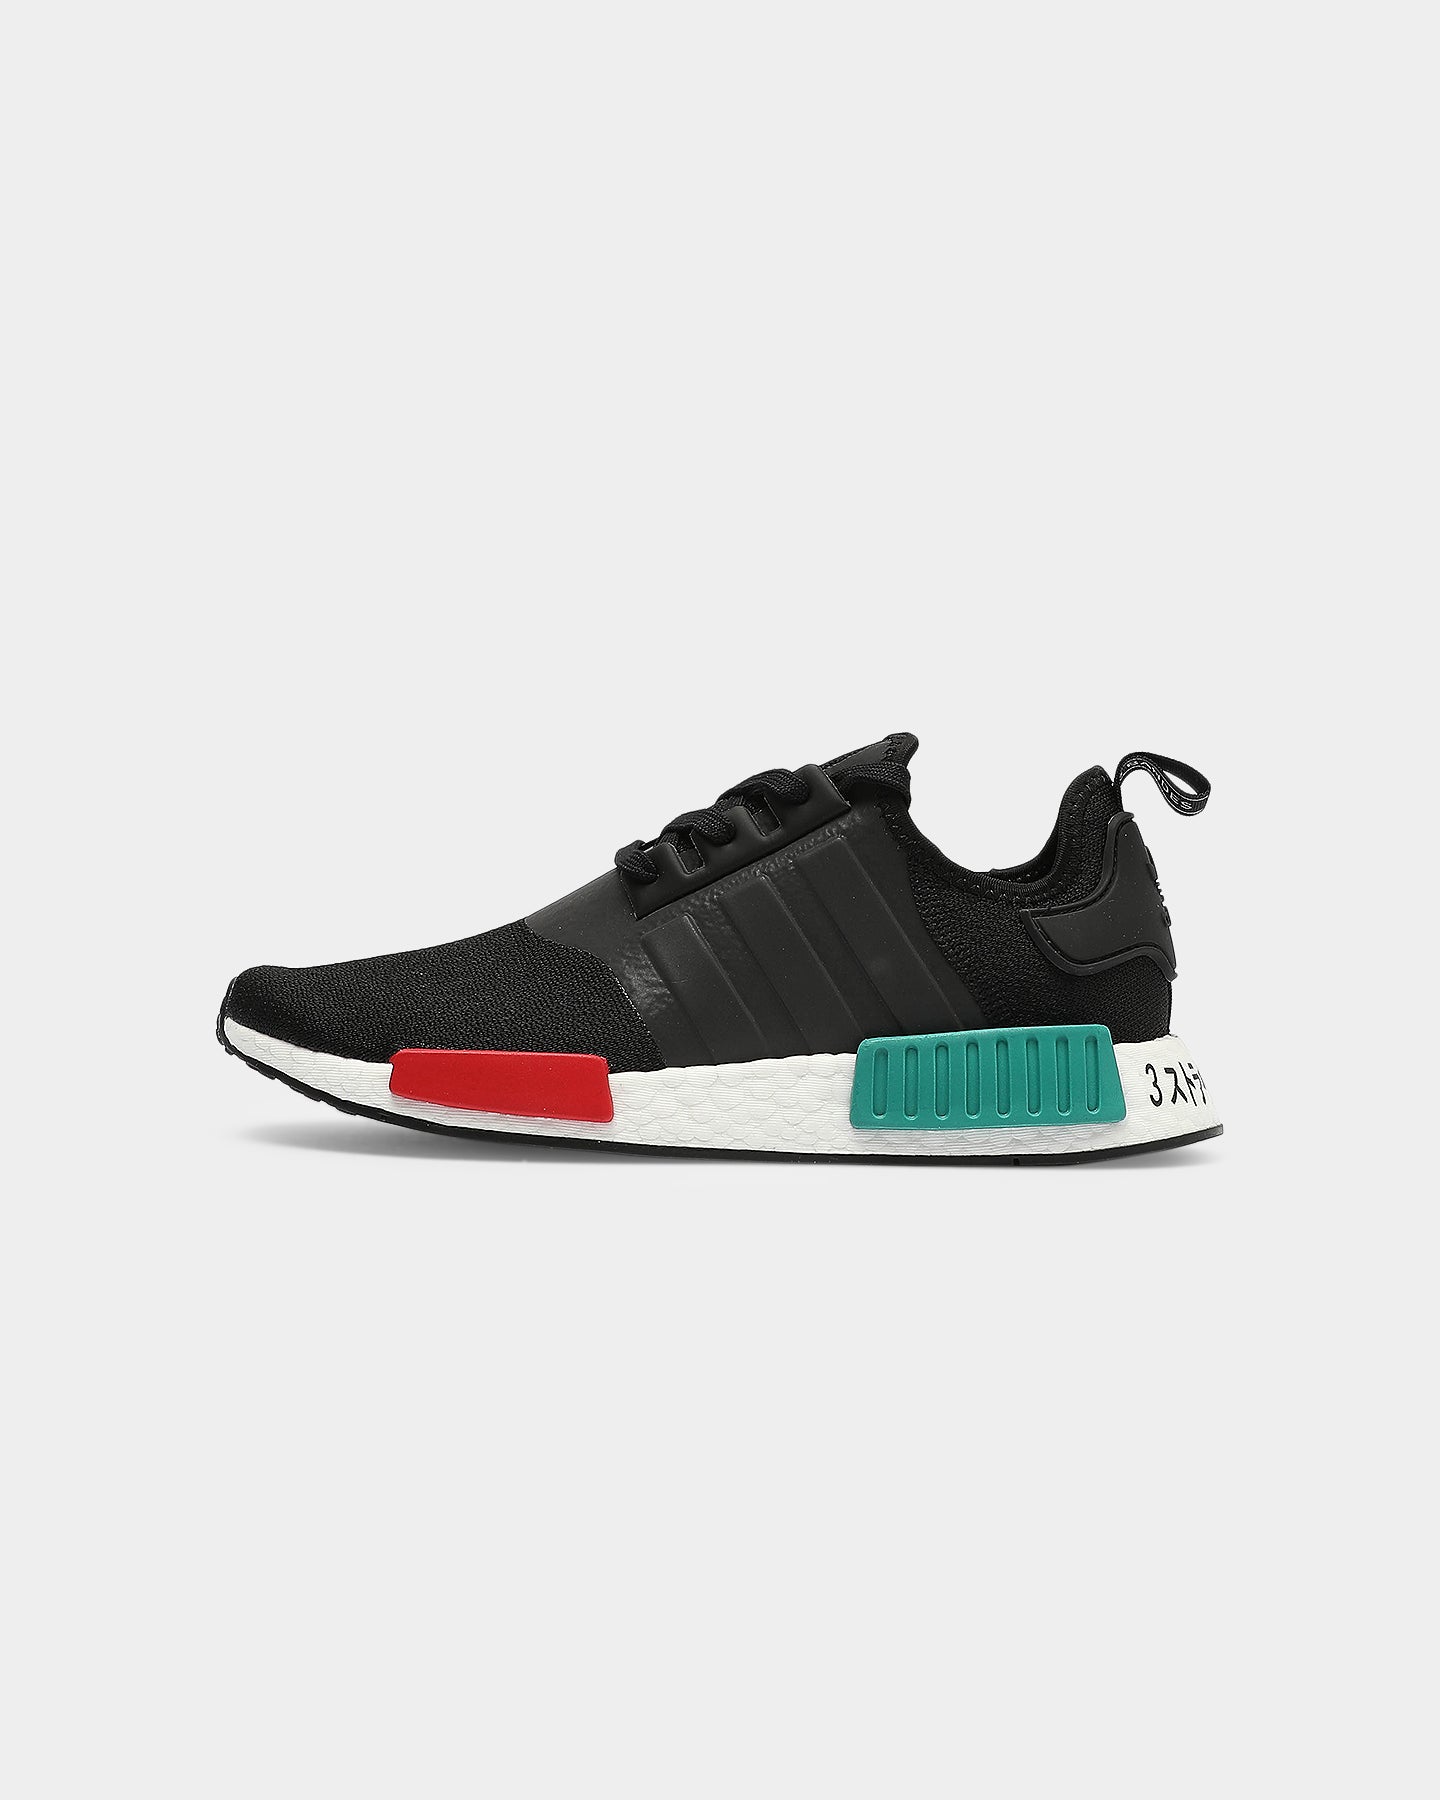 Adidas NMD R1 Black/Green/Red | Culture 